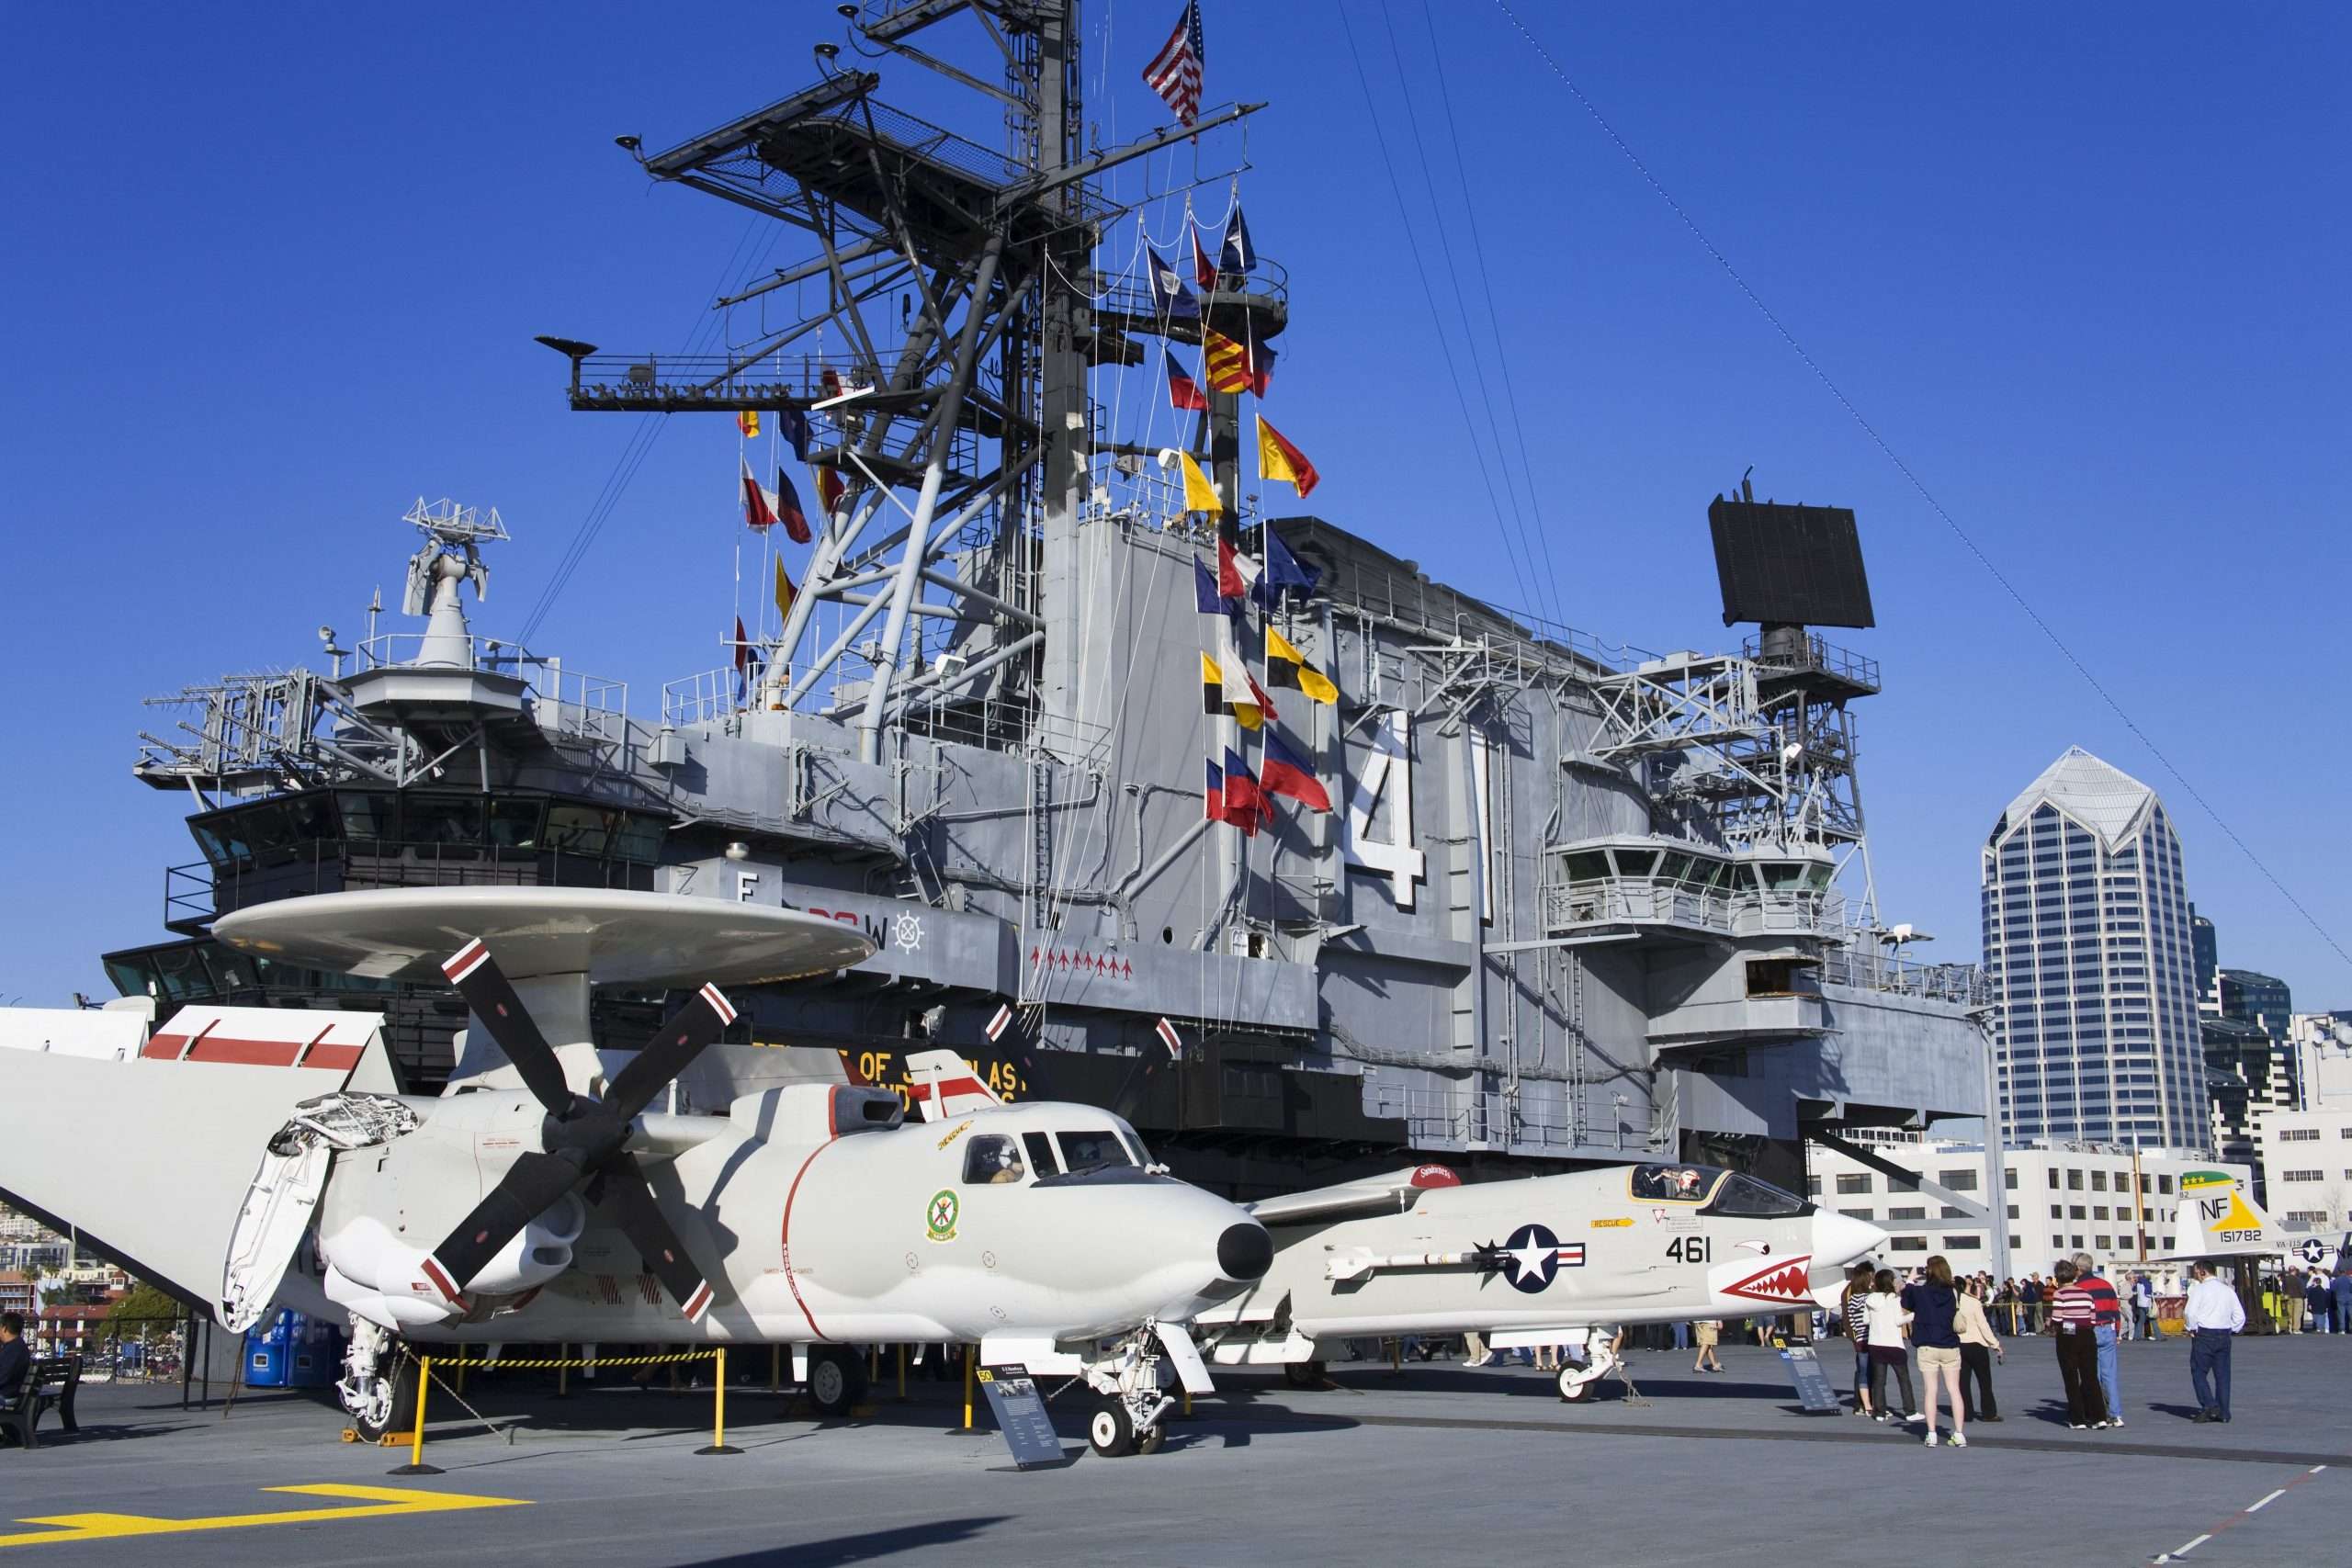 USS Midway Museum in San Diego